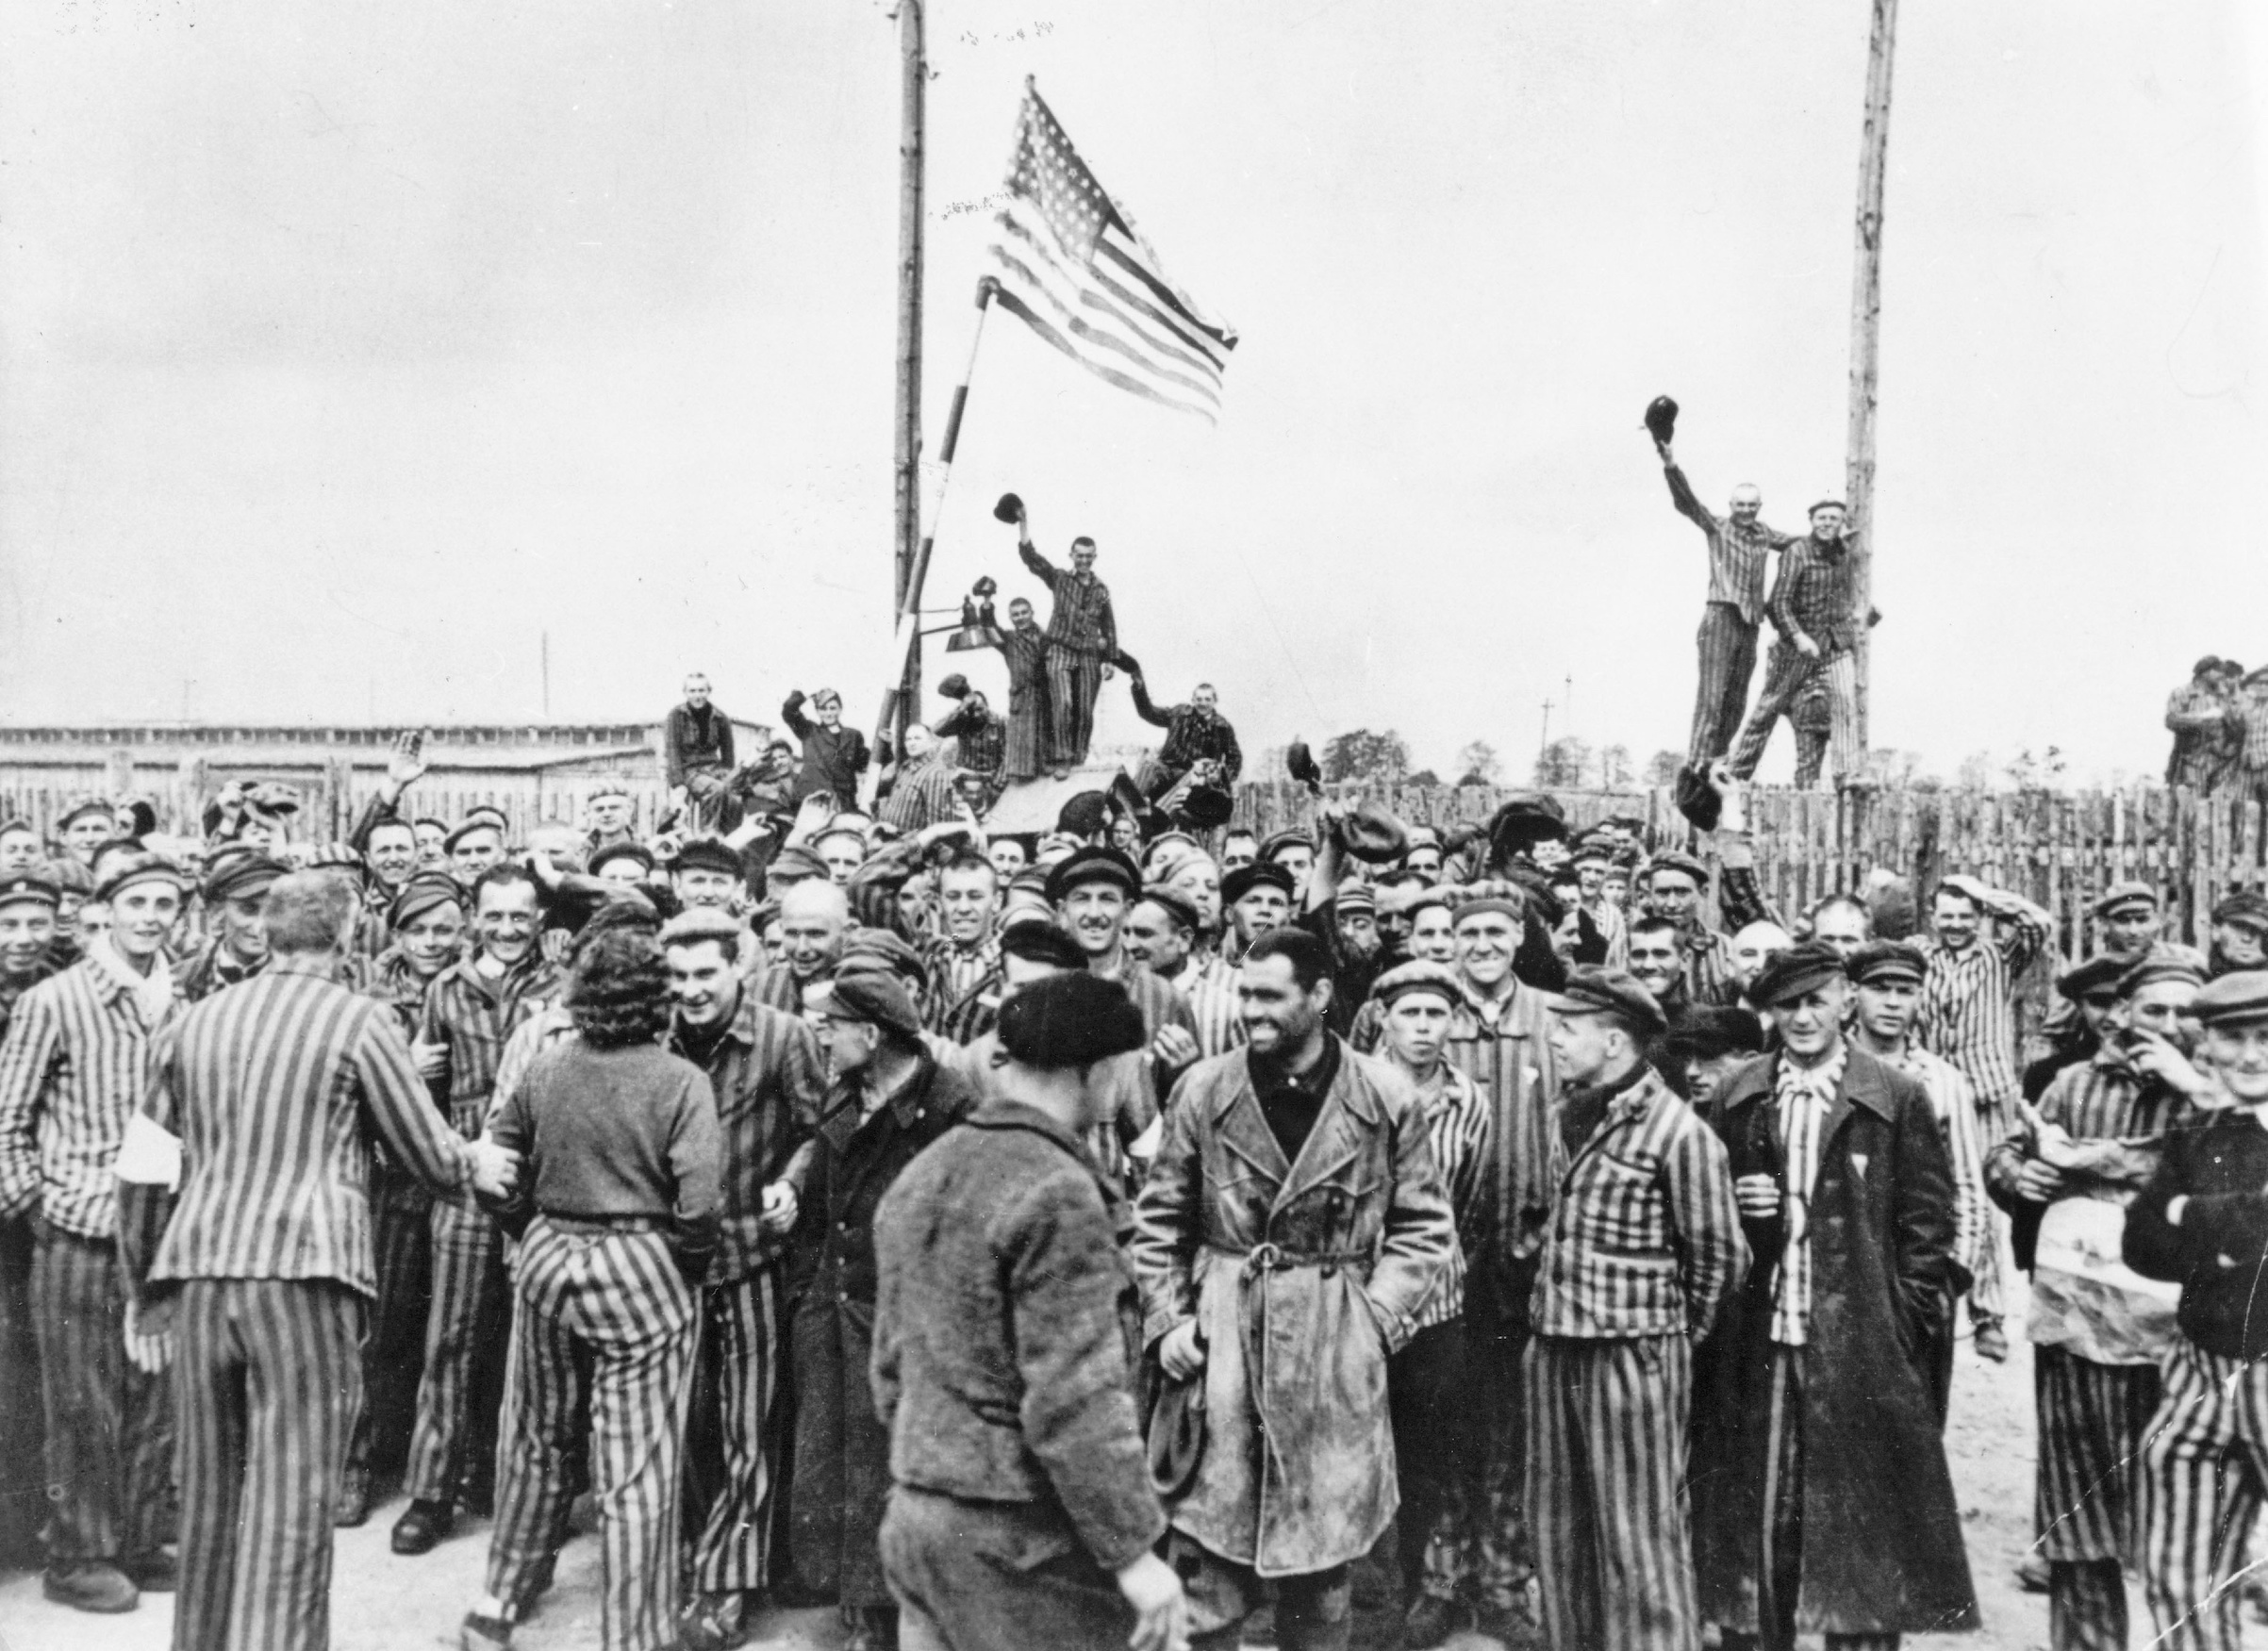 Detainees from Dachau concentration camp gathering on the former place of roll call after the liberation by American soldiers in 1945 (ullstein bild via Getty Images)